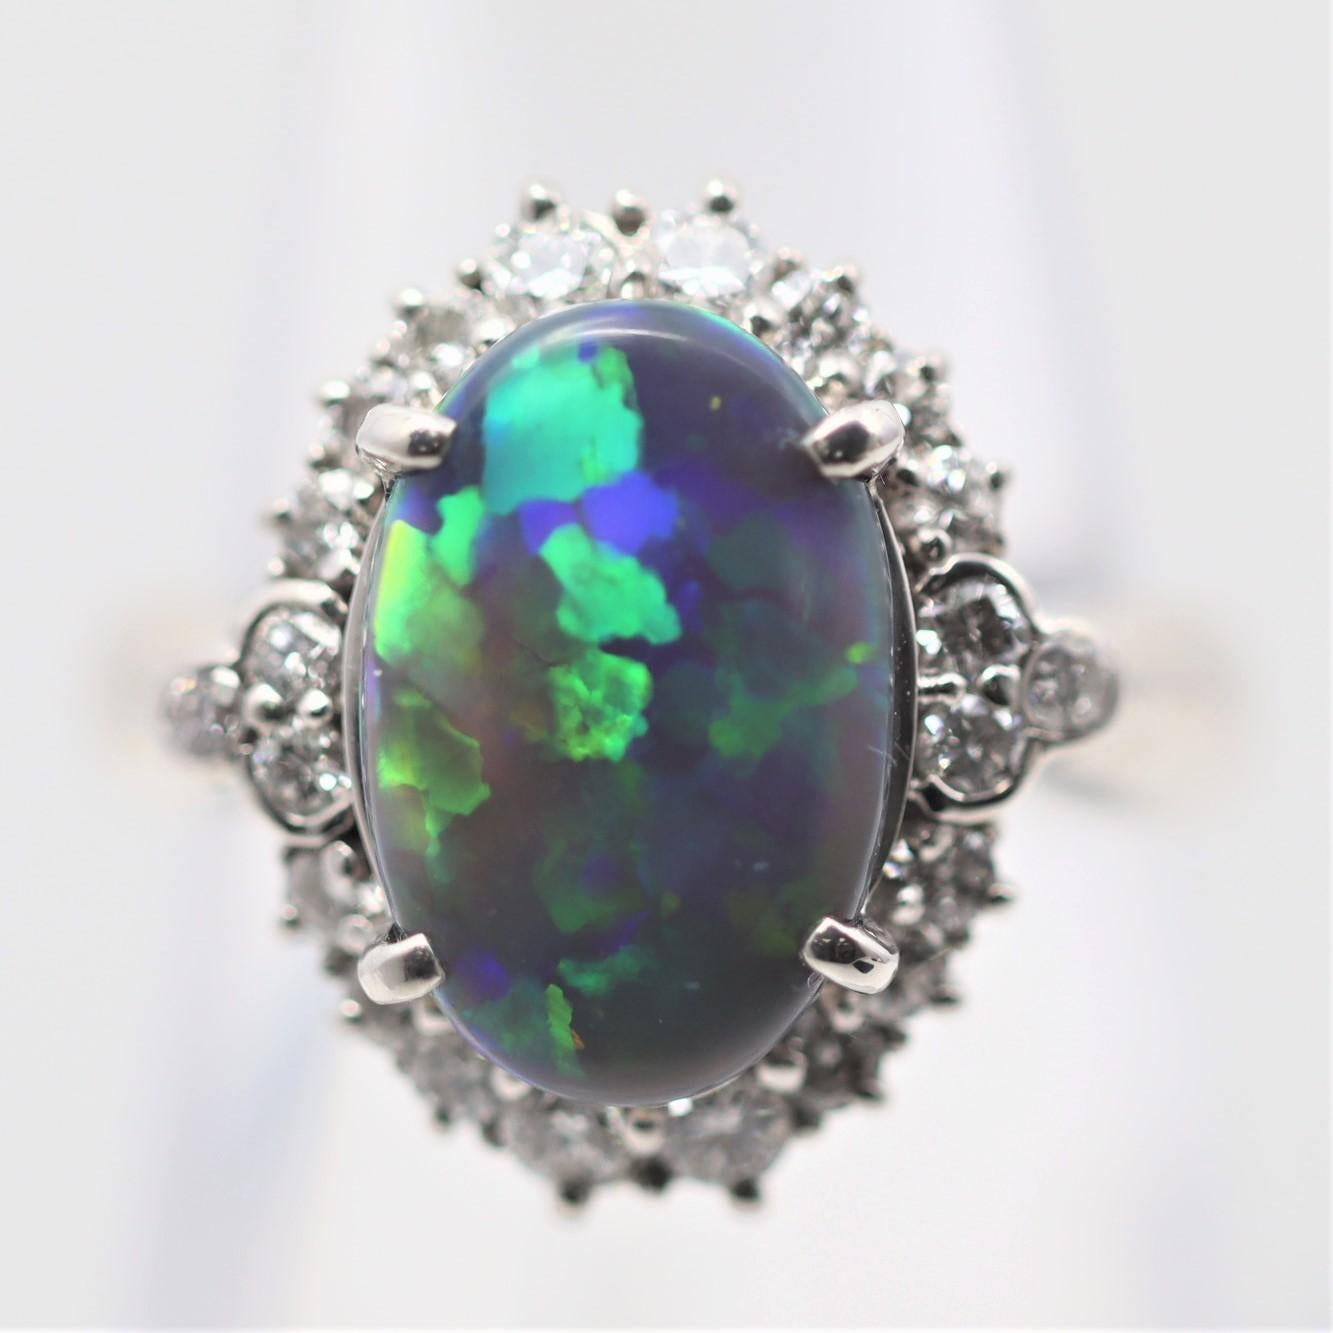 A classic black opal from the famous mines in Lightning Ridge, Australia. It weighs 2.07 carats and has fantastic play of color as bright vibrant flashes of green, blue, yellow, and orange can be seen across the stone. It is haloed by 0.64 carats of